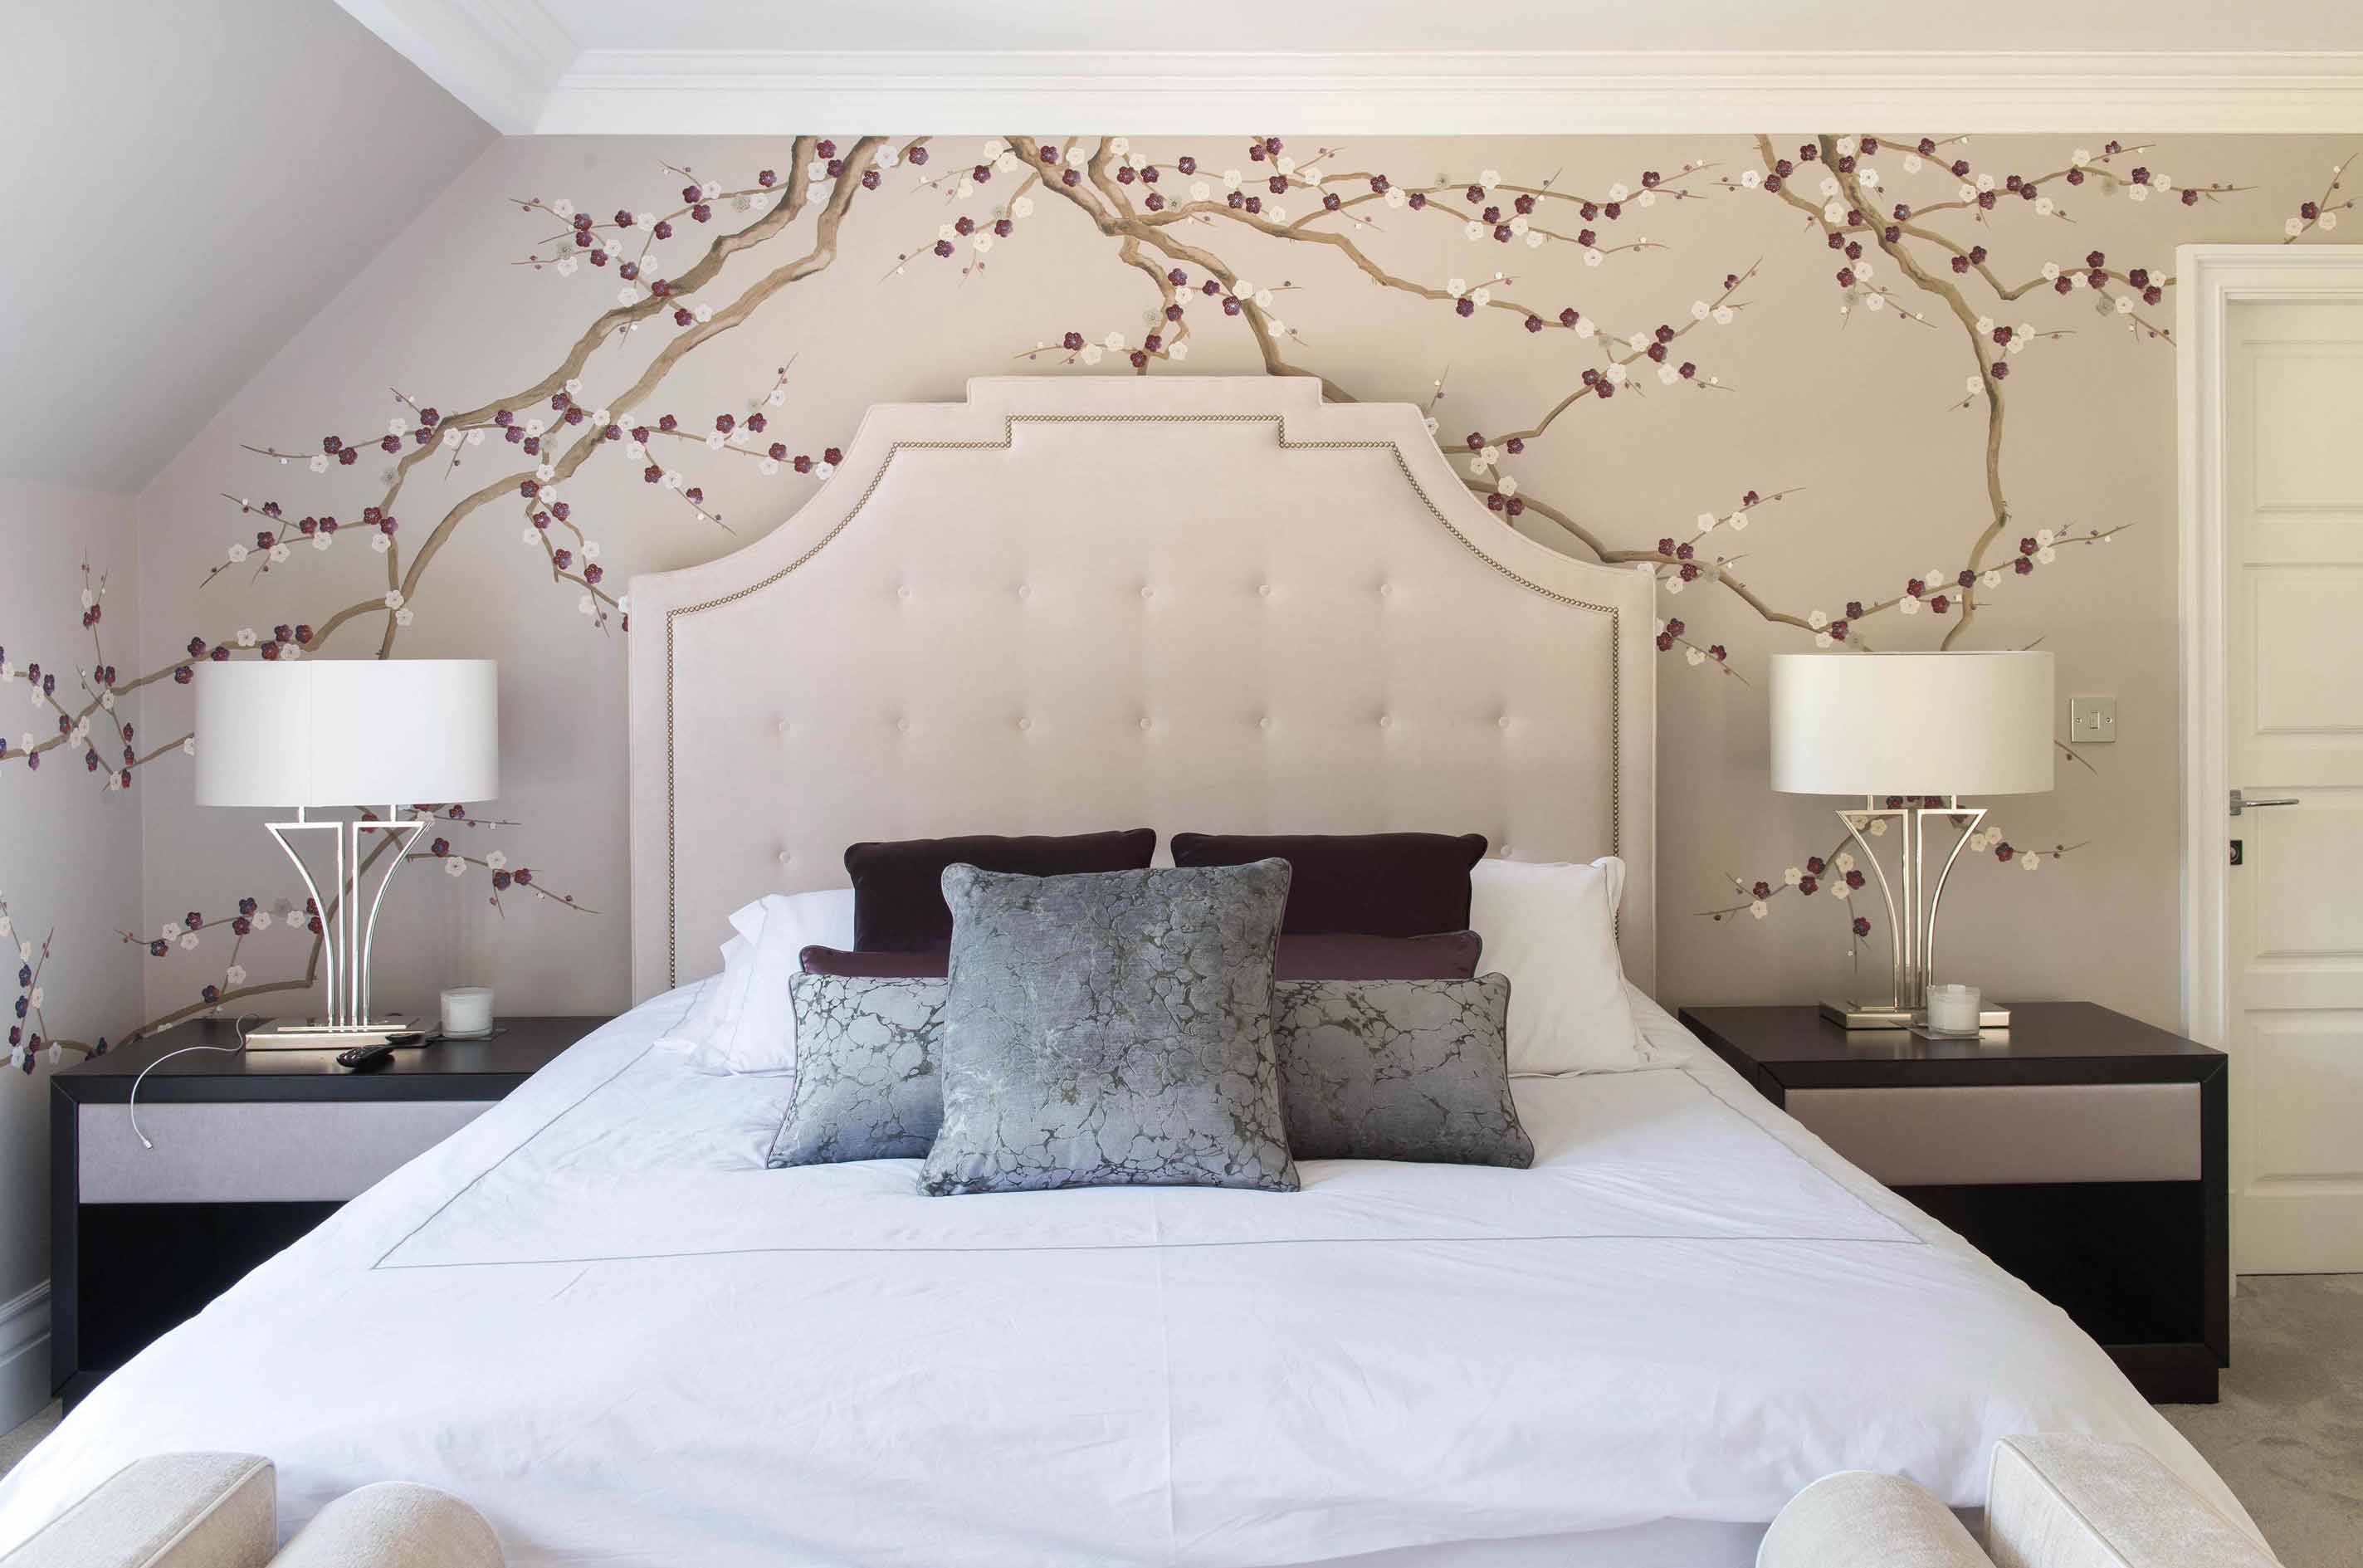 Hand-painted chinoiserie blossom flower mural by diane hill in a bedroom